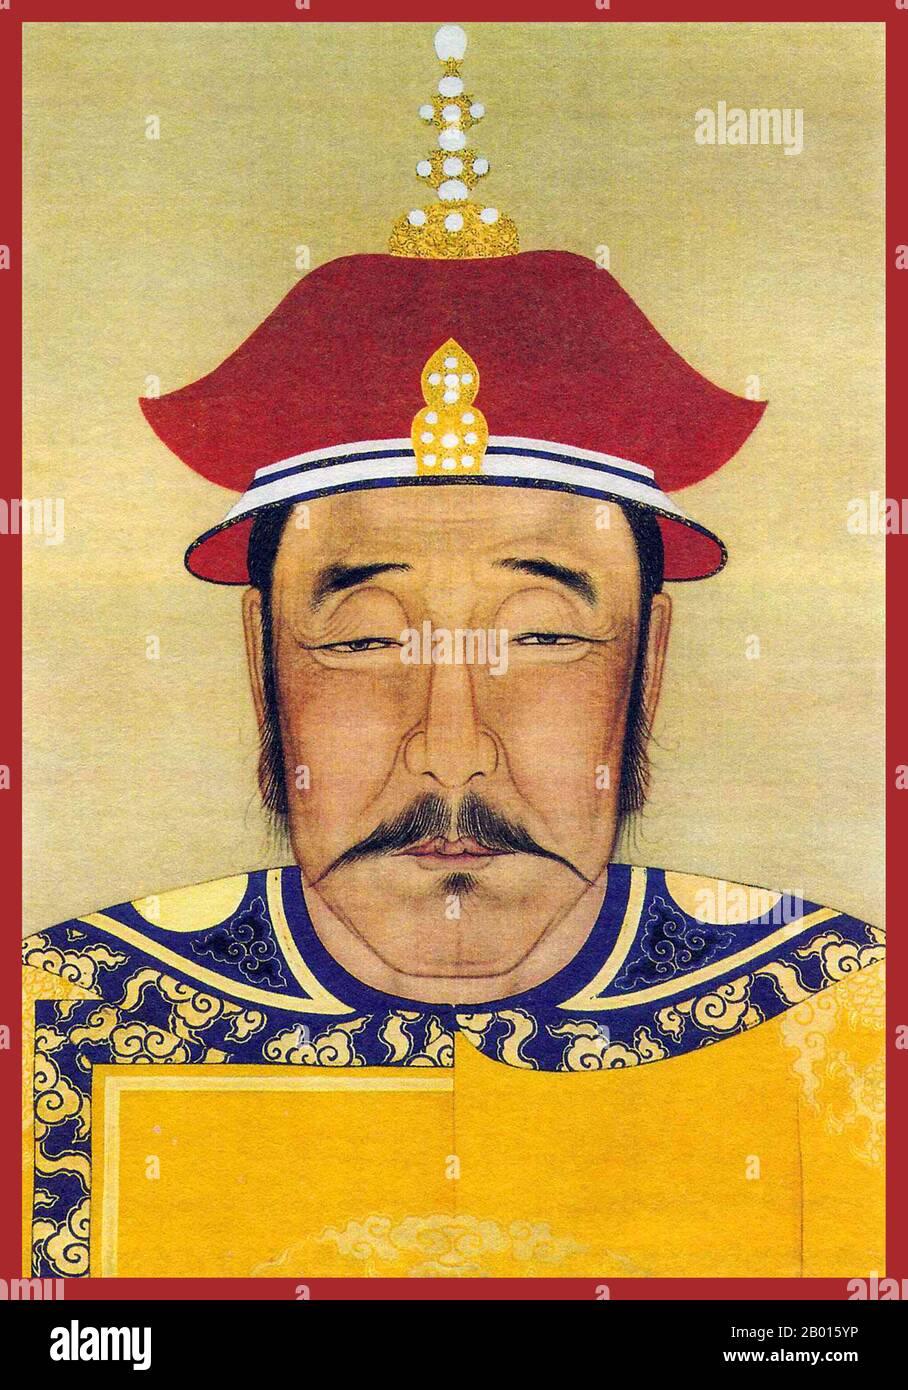 China: Nurhaci (February 21, 1559 – September 30, 1626), 1st Khan of the Later Jin Dynasty. Hanging scroll painting, 17th century.  Nurhaci/Nurhachi, temple name Taizu, was an important Jurchen chieftain who rose to prominence in the late 16th century in what is today Northeastern China. Nurhaci was part of the Aisin Gioro clan, and was the founding khan of the Later Jin Dynasty, ruling from 1616 to 1626.  Nurhaci reorganised and united various Jurchen tribes, consolidated the Eight Banners military system, and eventually launched an assault on China Ming Dynasty and Korea's Joseon Dynasty. Stock Photo